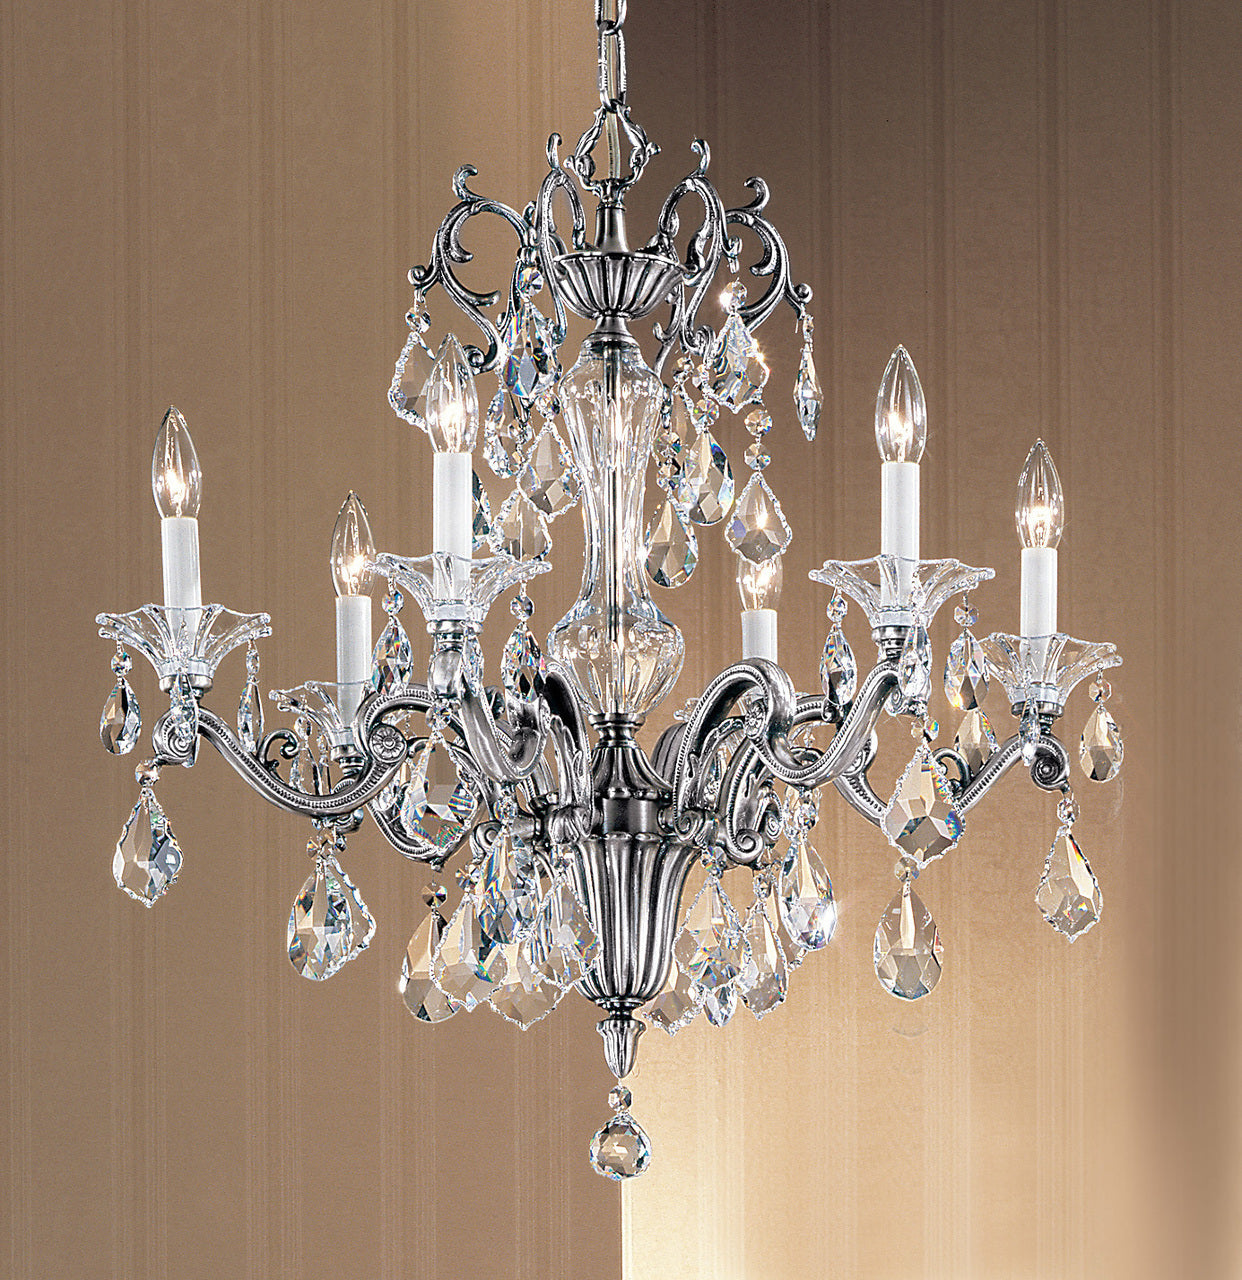 Classic Lighting 57106 MS S Via Firenze Crystal Chandelier in Millennium Silver (Imported from Spain)